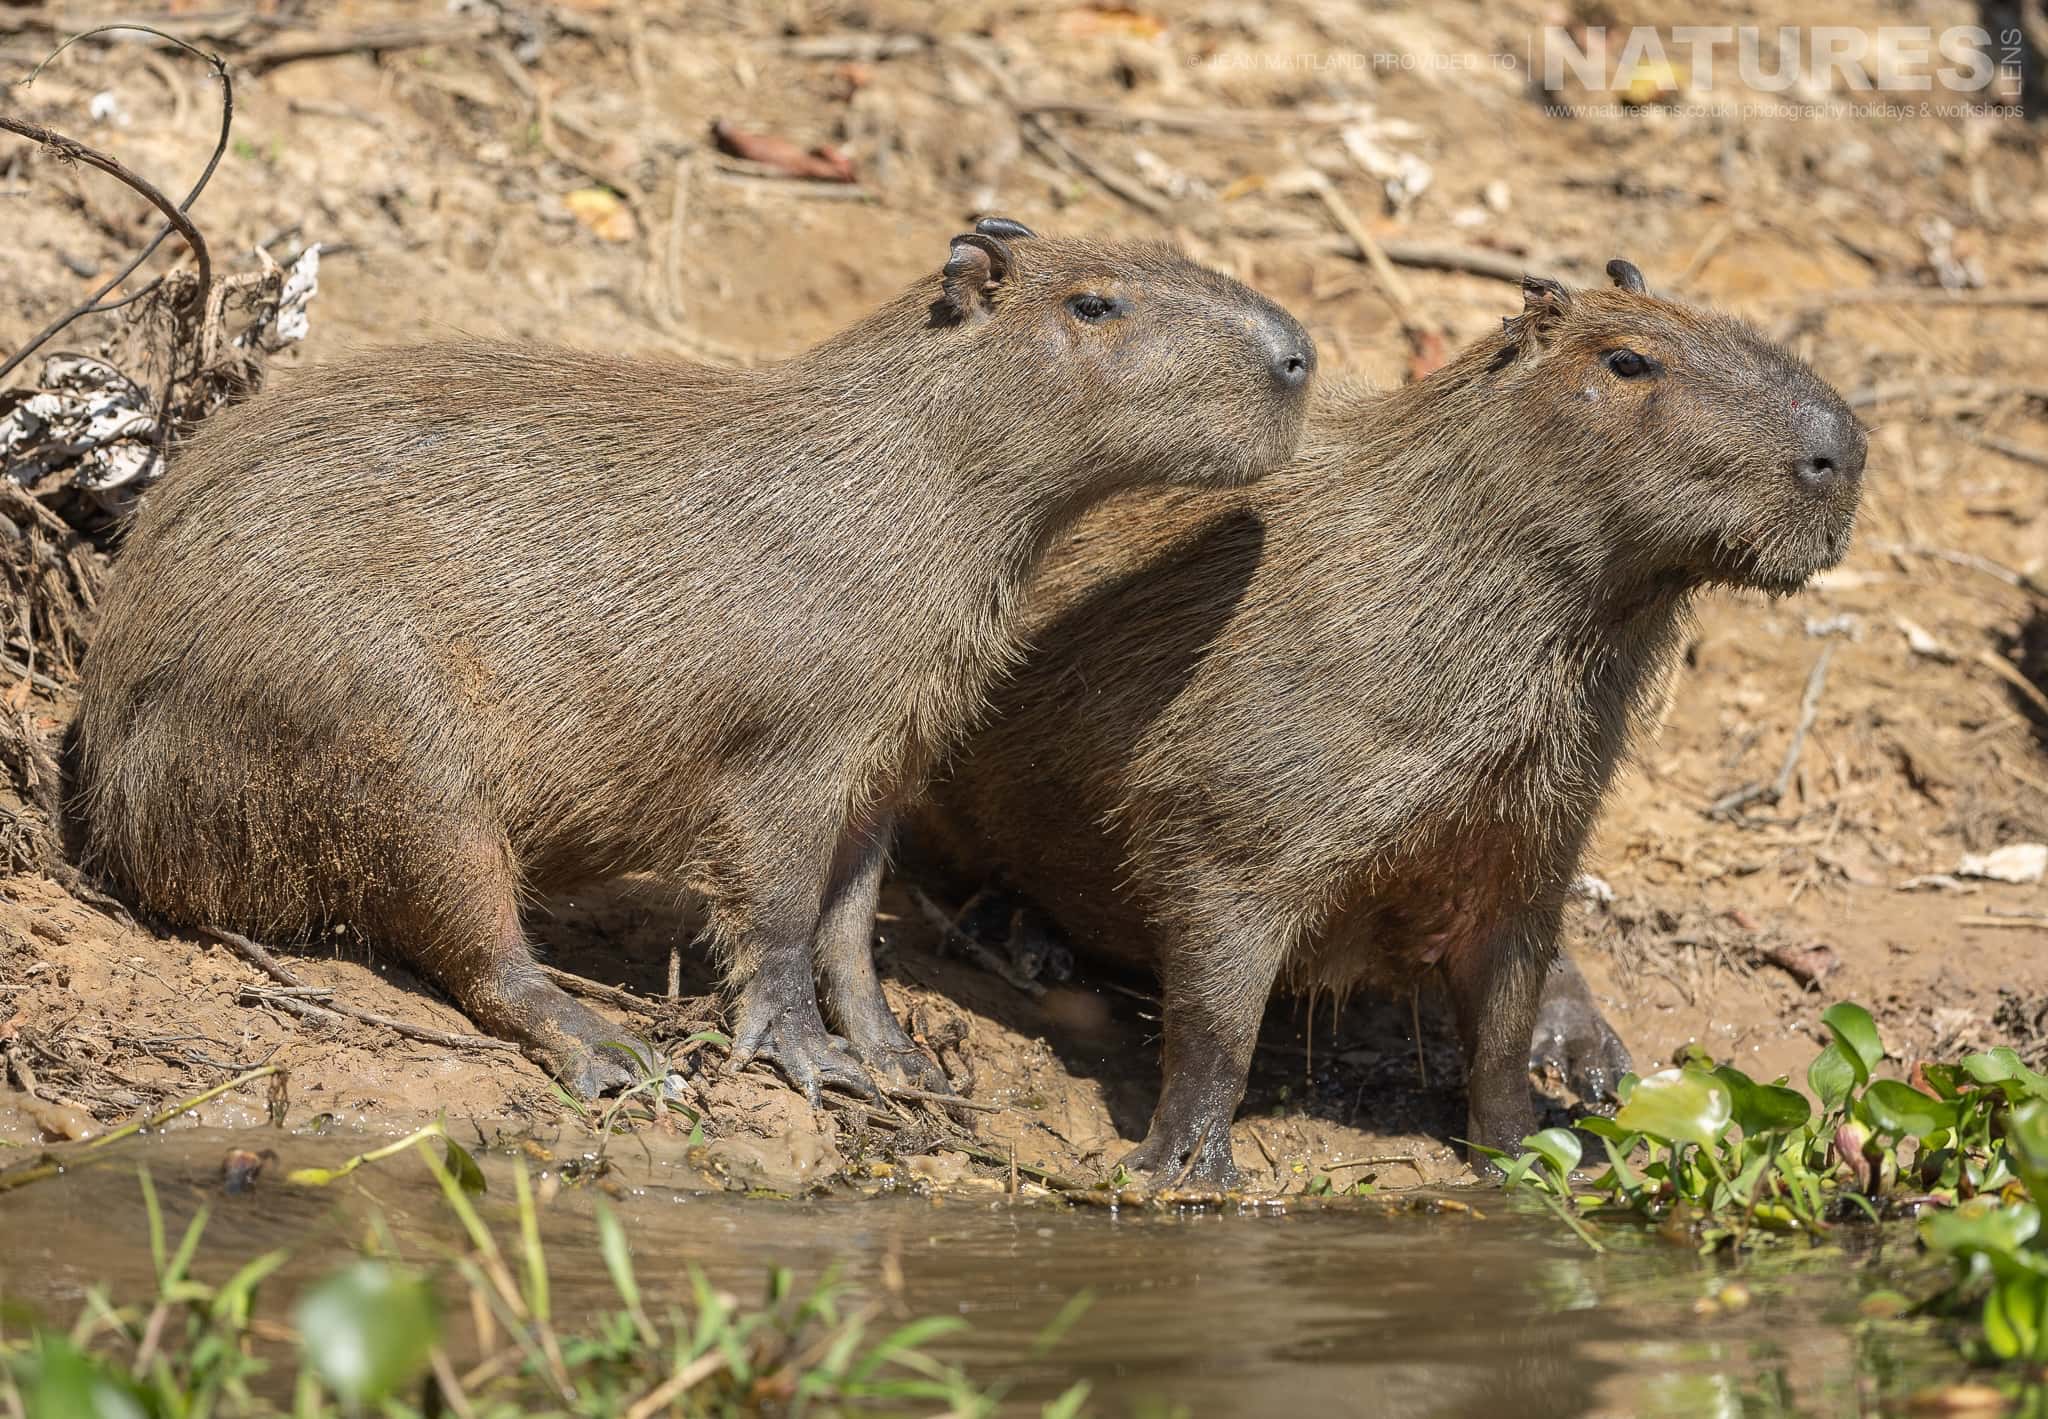 A Pair Of Capybara Found On The Banks Of The Pantanal River During The Natureslens Jaguars Of The Pantanal Photography Holiday